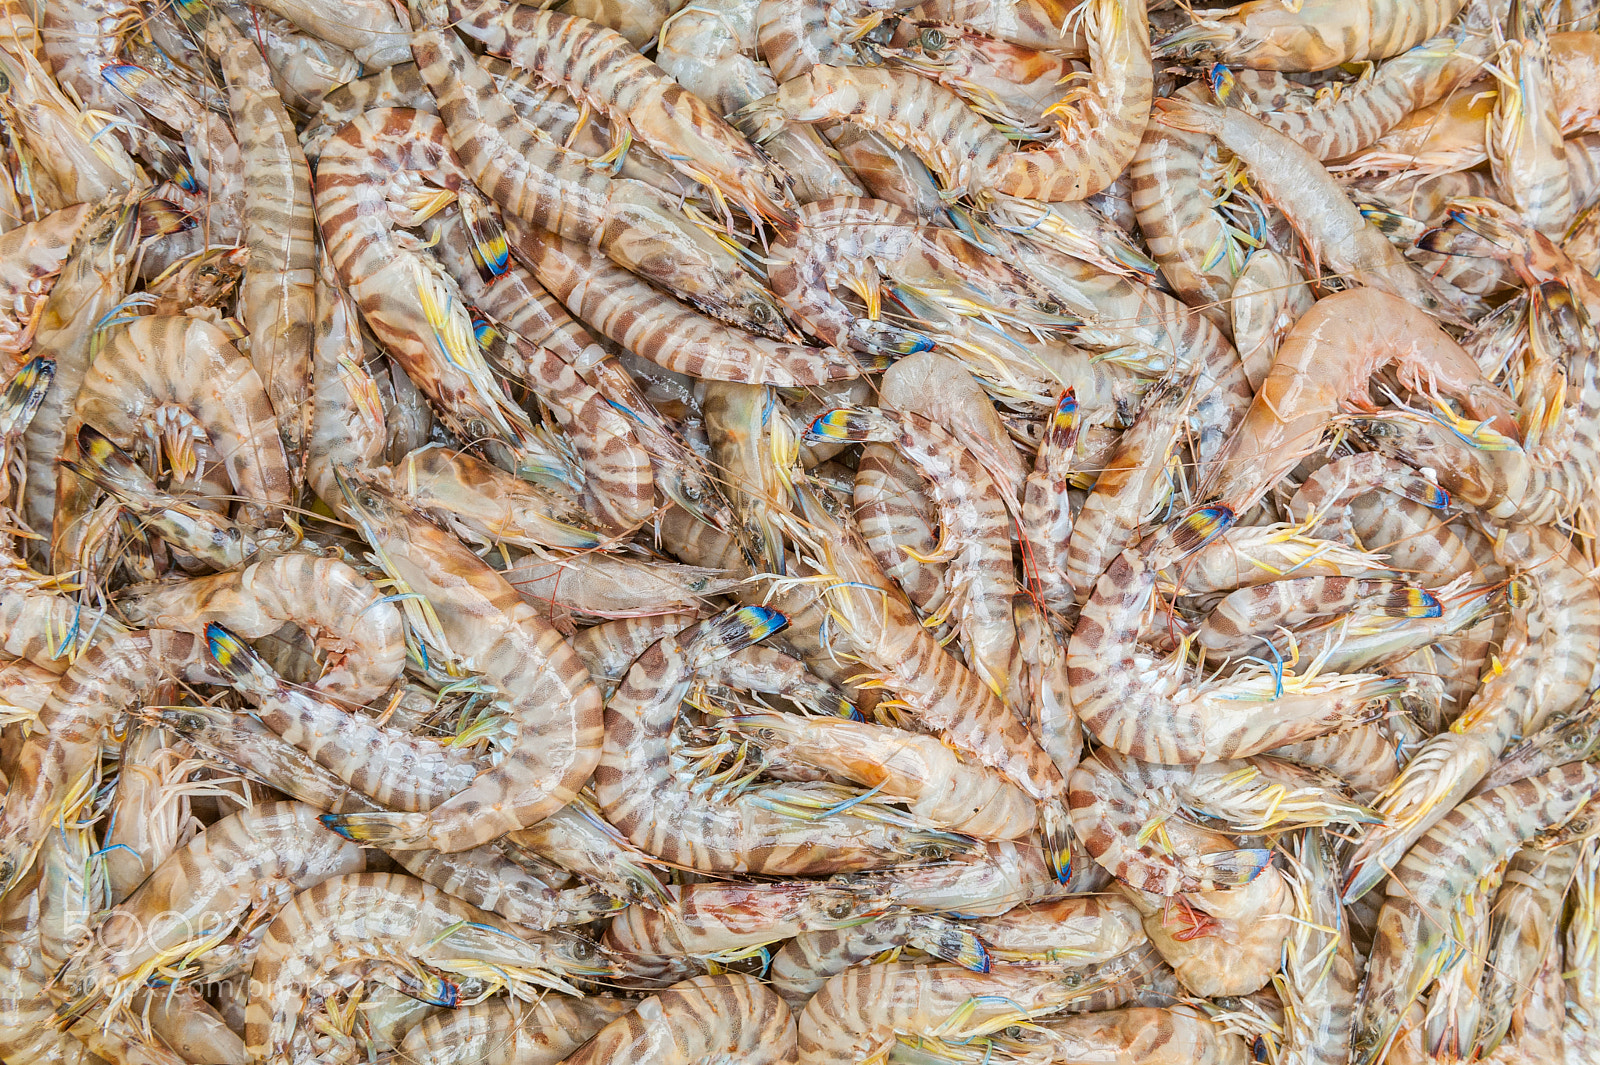 Nikon D700 sample photo. Seafood sold at the photography